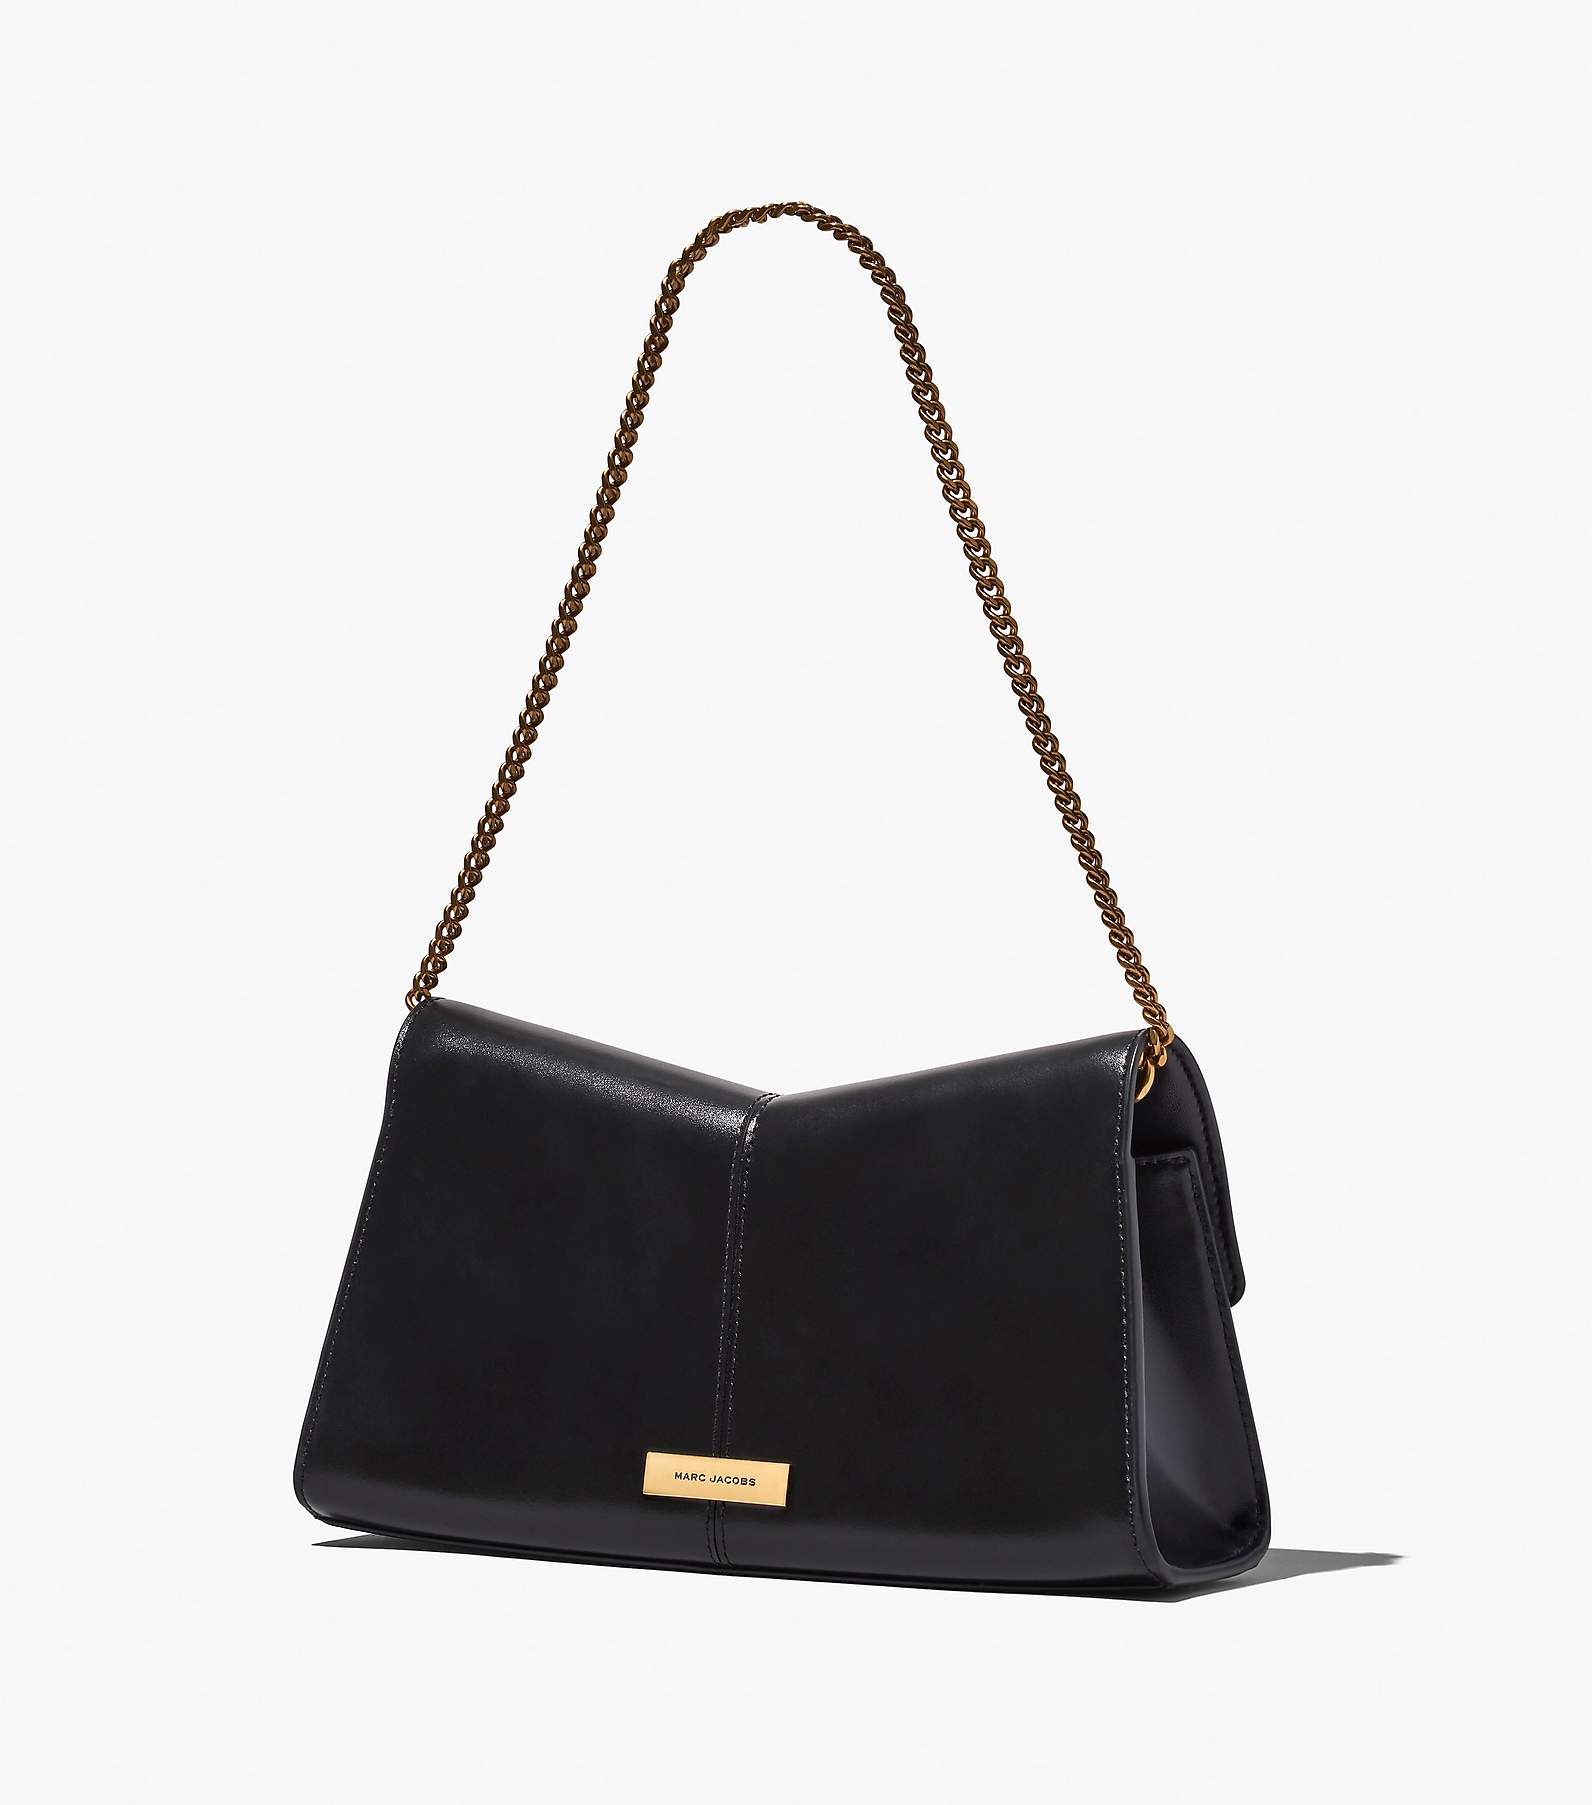 Marc Jacobs The Pouch Clutch Bag in Black